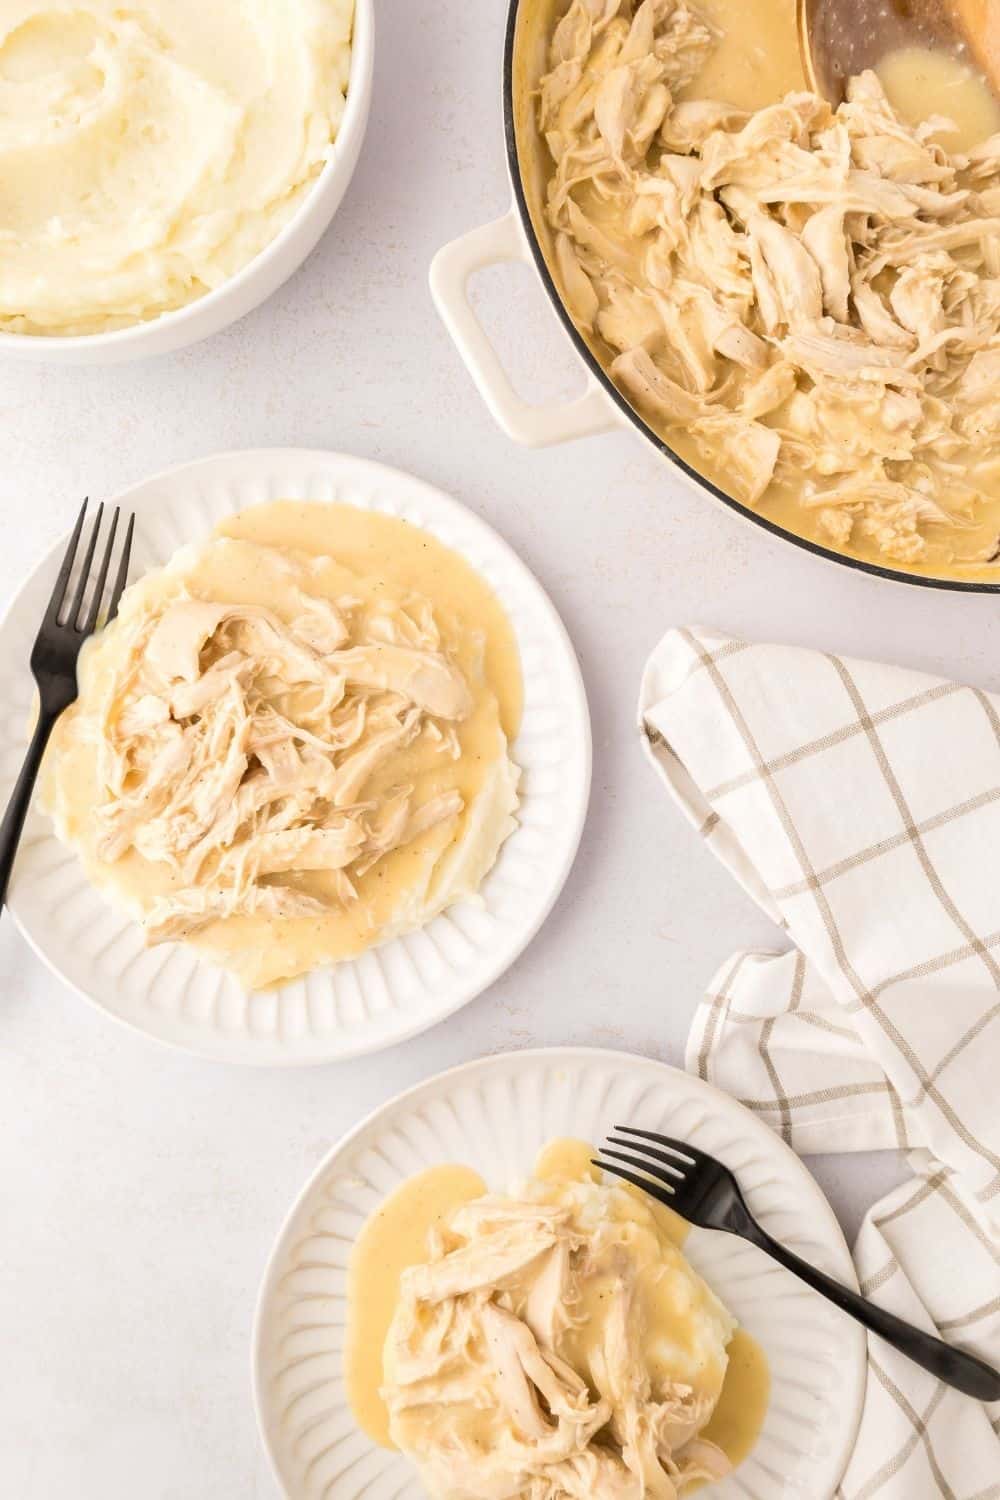 overhead view of white plates serving shredded chicken and gravy over mashed potatoes, with the skillet in the background.